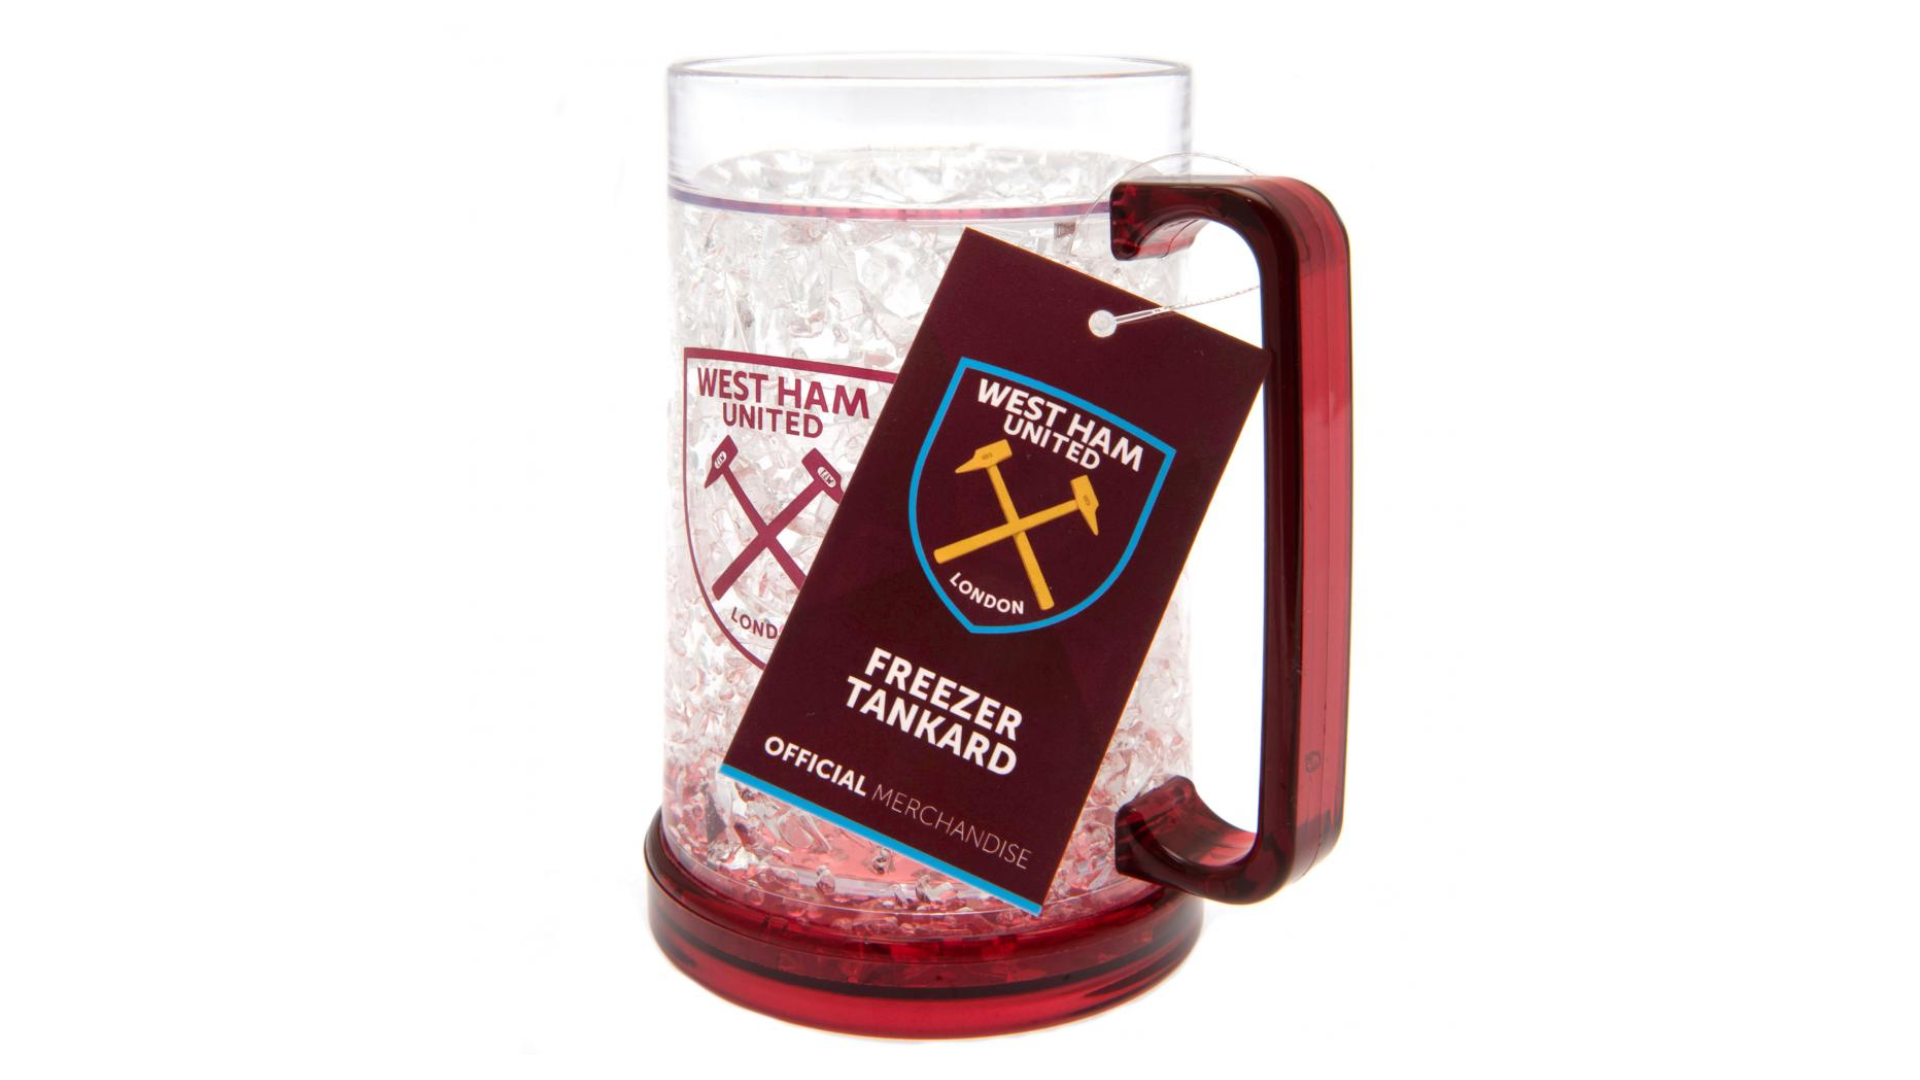 Chequered Check Design Football Gift West Ham United Egg Cup 